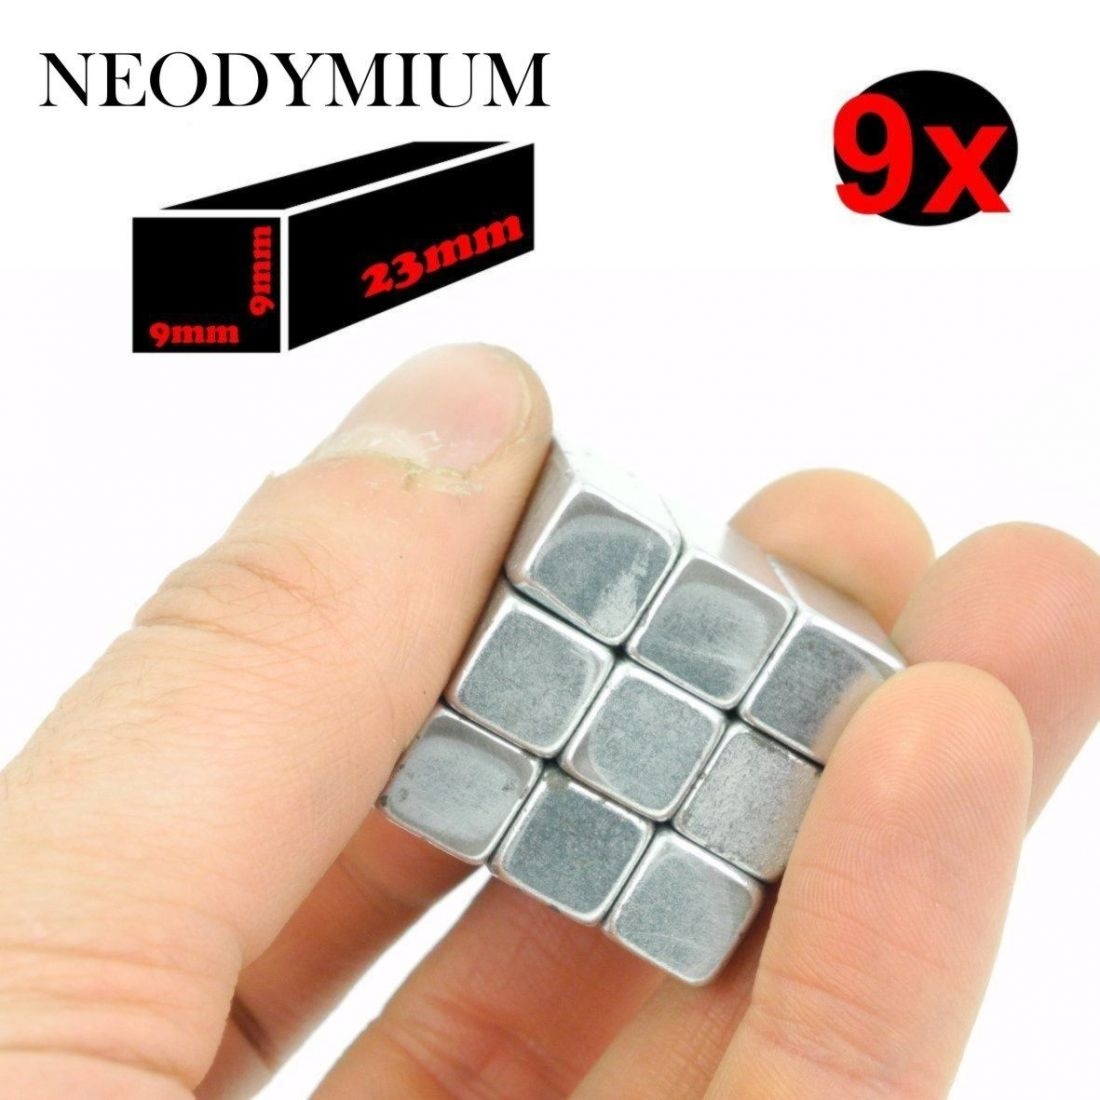 https://www.cnjy-led.fr/3739-thickbox_default/9x-aimant-neodymium-rectangle-23x9x9mm-puissant-magnet-permanent-n52-ni.jpg